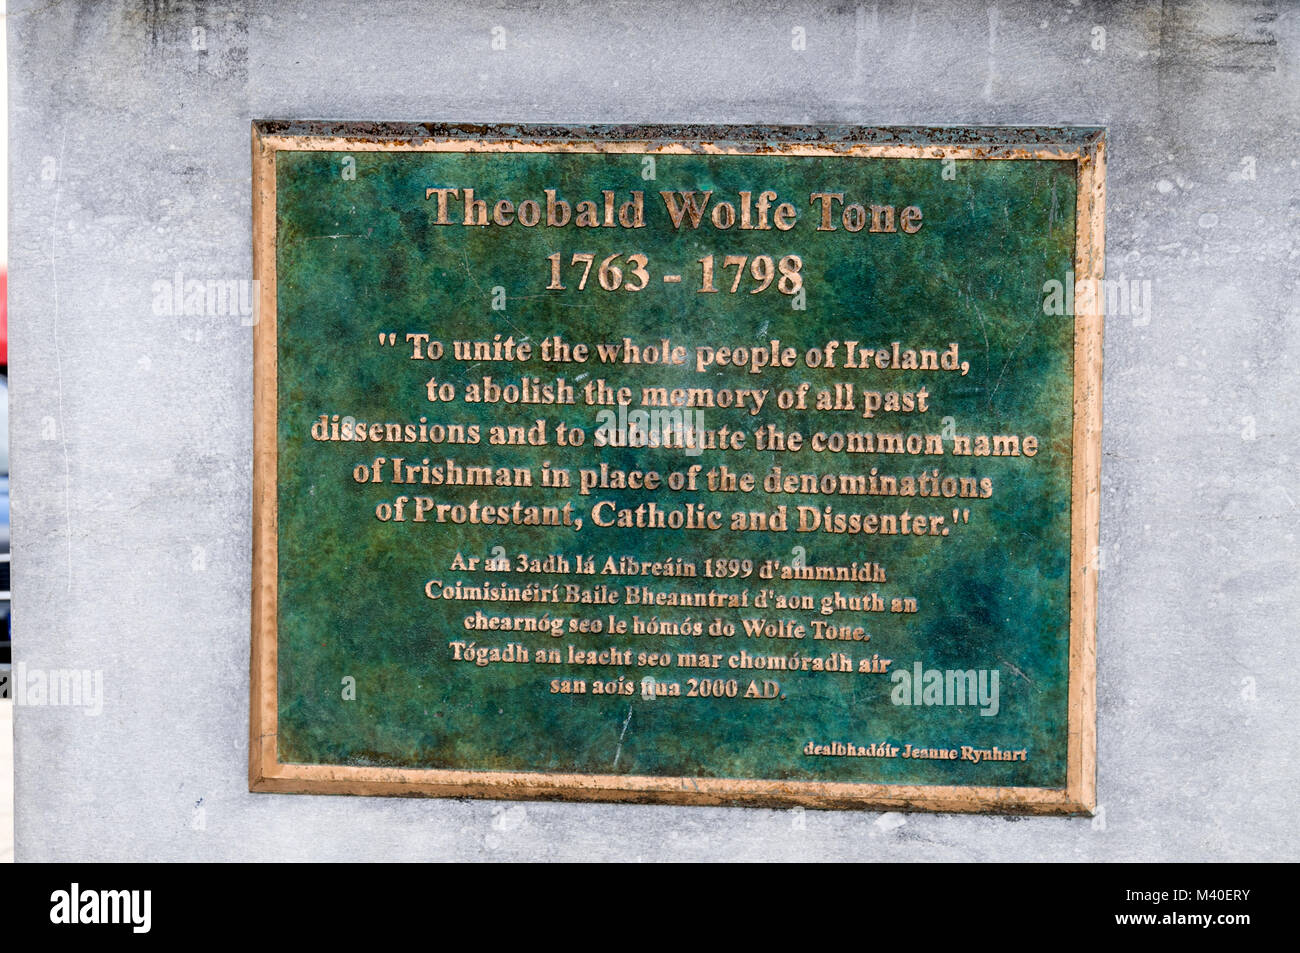 A plaque attached to the statue of  Theobald Wolfe Tone.1763- 1798.  He  was an Irish revolutionary figure and his statue stands  in WolfeTone Square Stock Photo